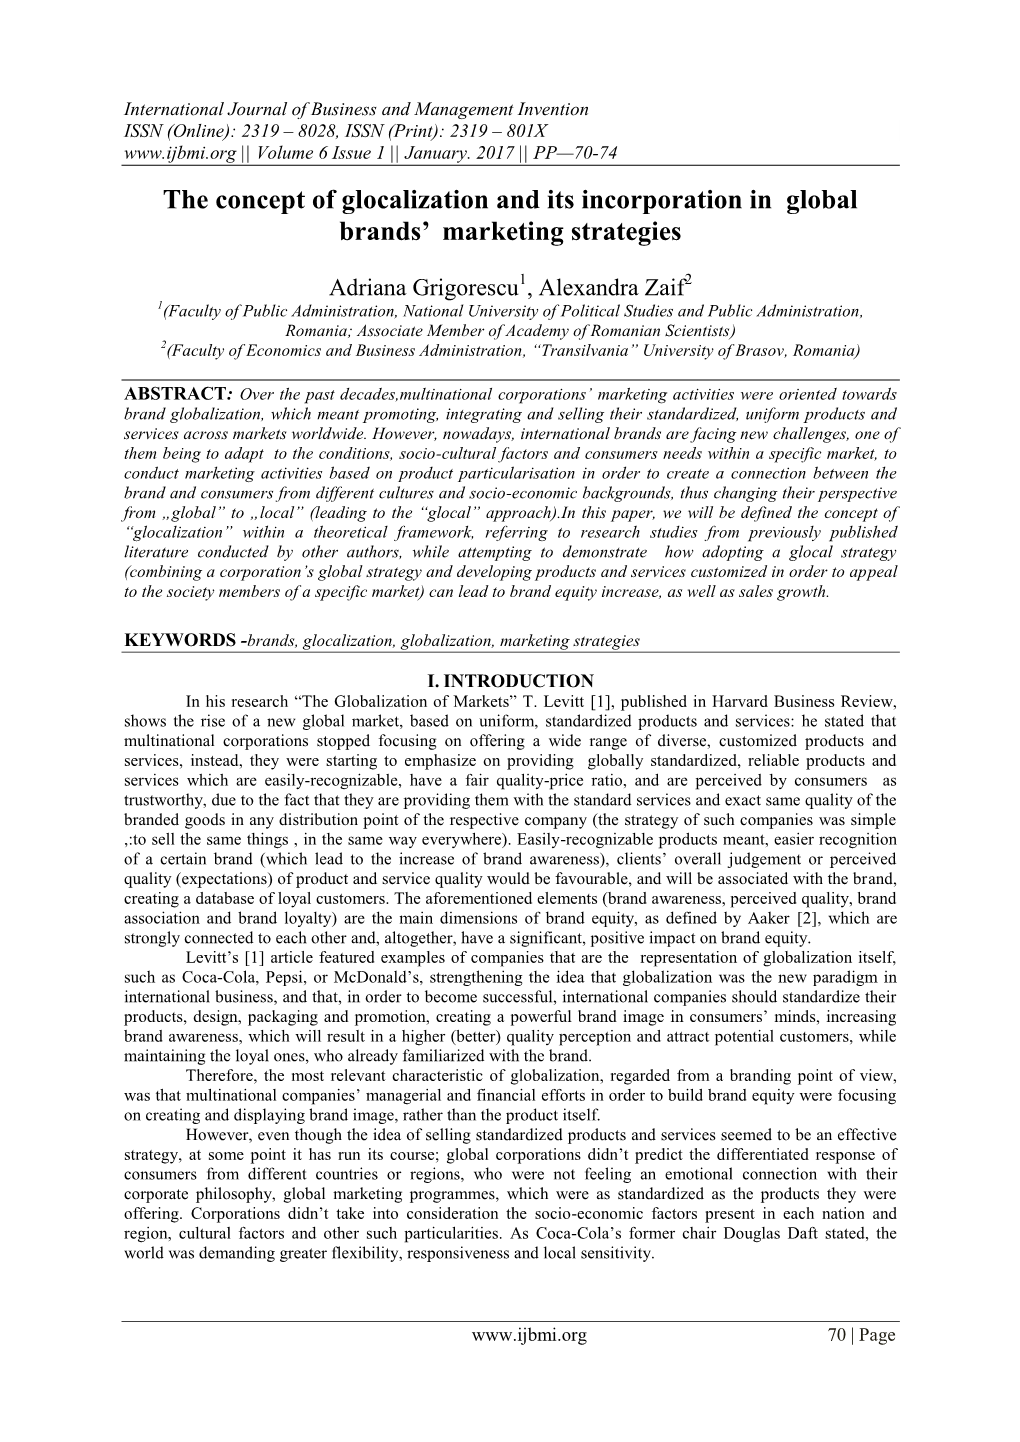 The Concept of Glocalization and Its Incorporation in Global Brands’ Marketing Strategies